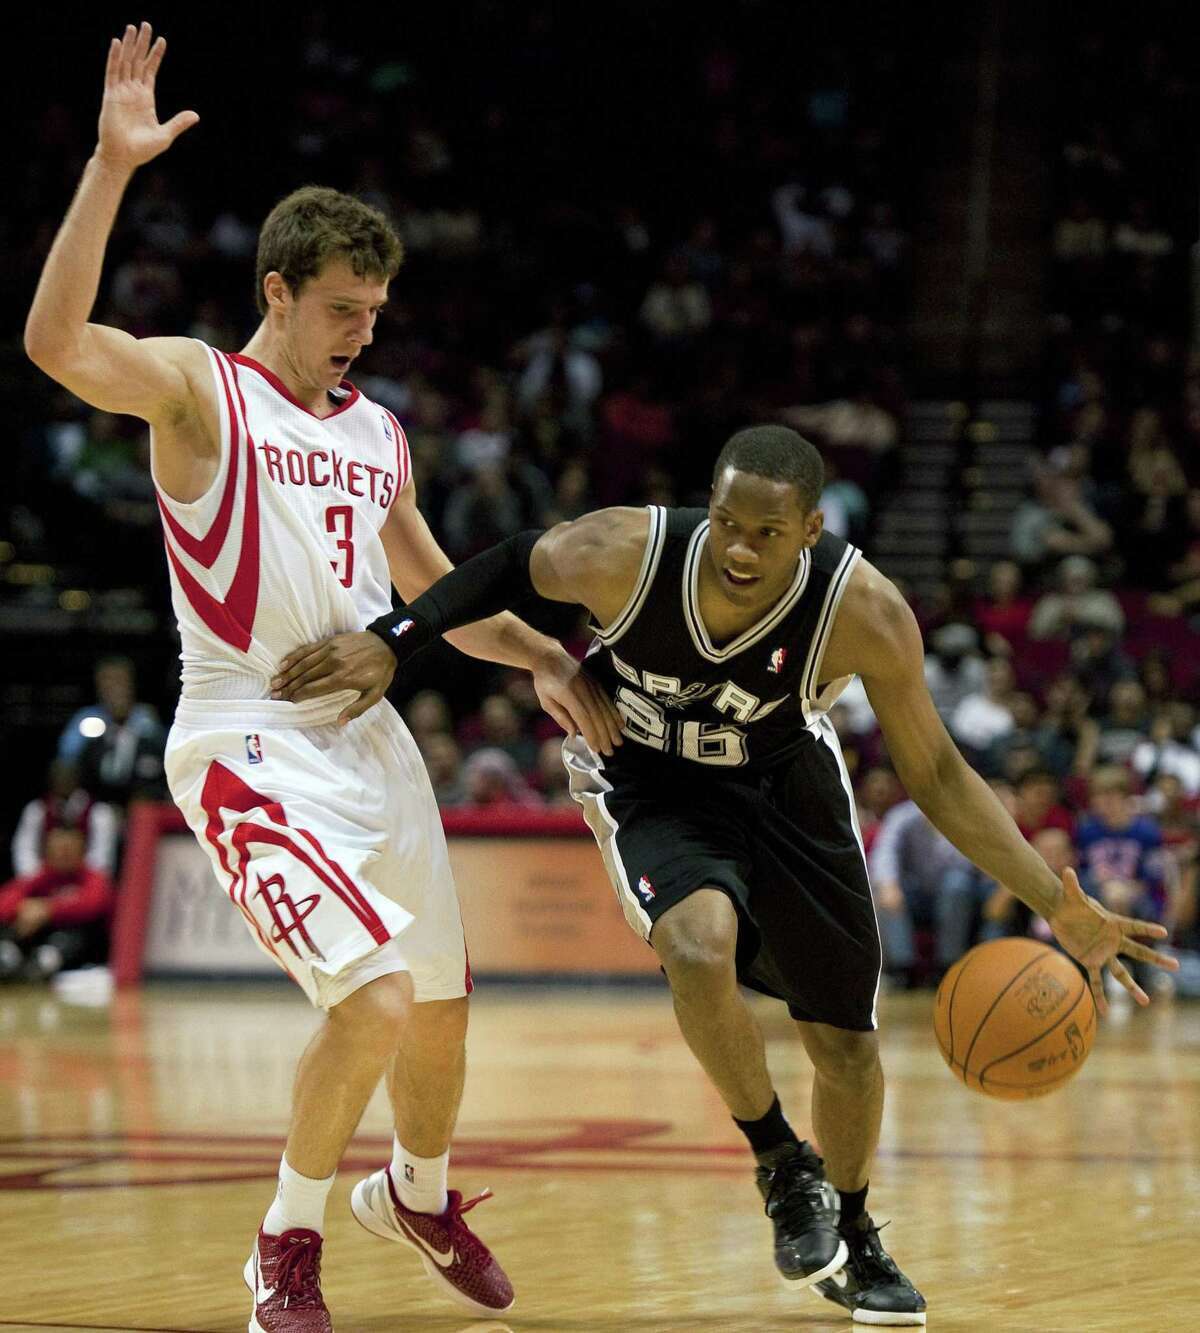 Spurs’ Antoine Hood drives around the Rockets’ Goran Dragic during the fourth quarter of a preseason game on Dec. 17, 2011, in Houston.